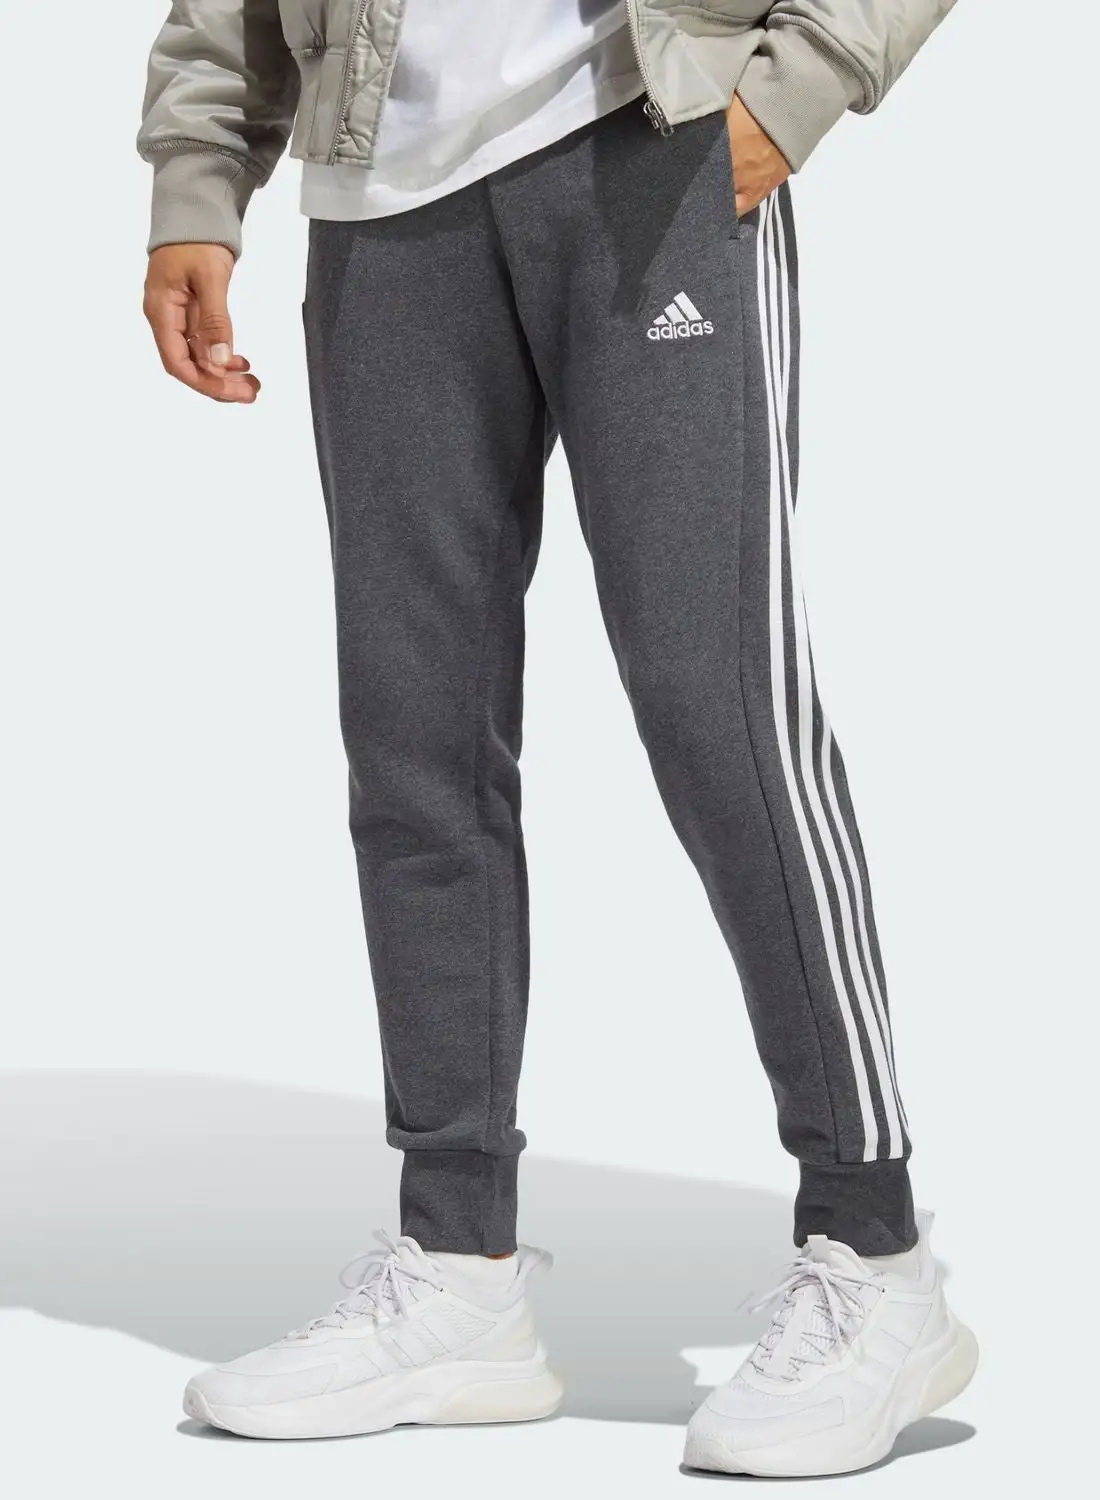 Adidas 3 Stripes French Terry Tapered Cuffed Pants